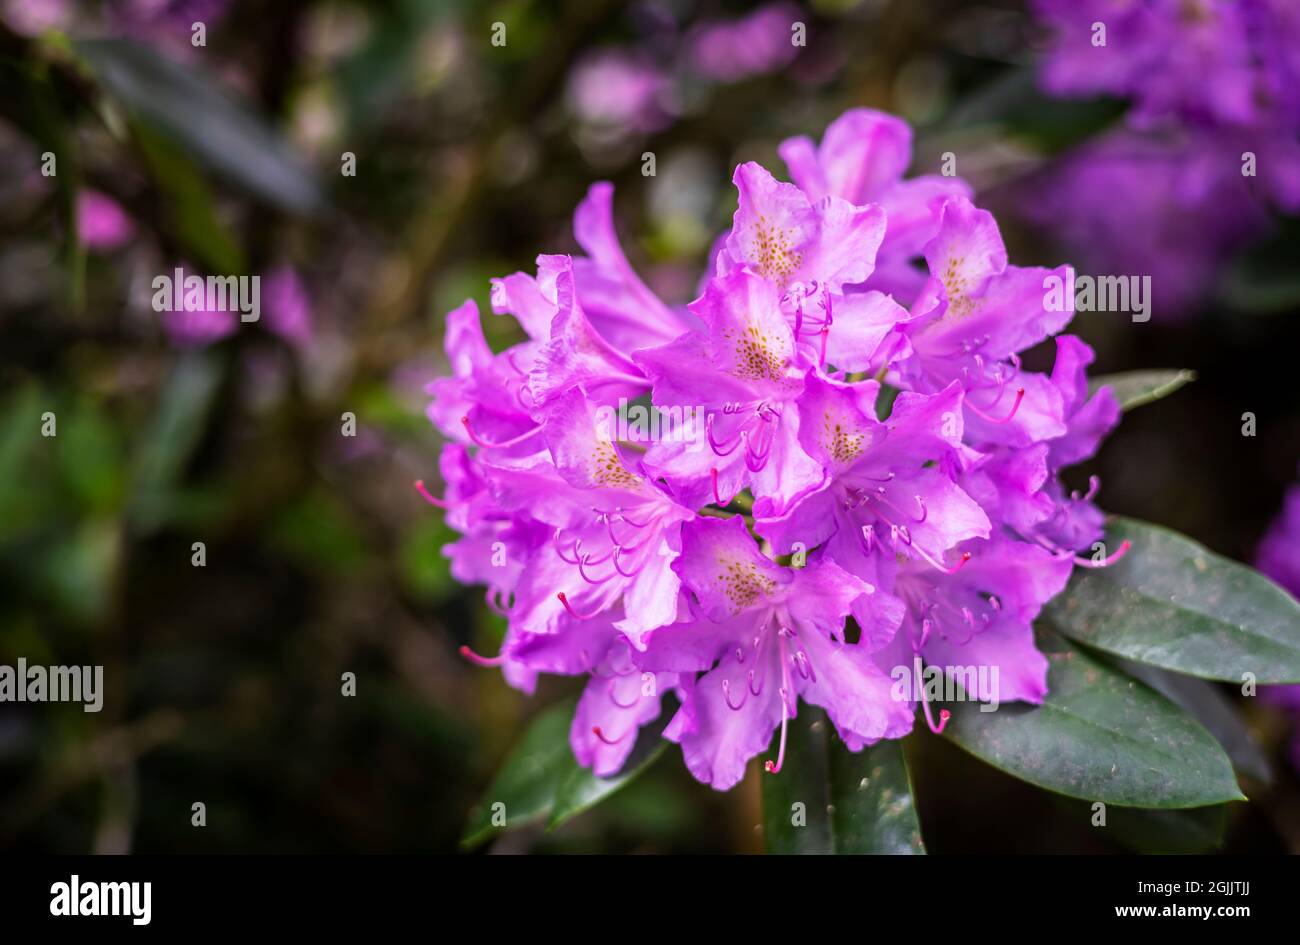 Large cluster of purple rhododendron flowers. Stock Photo